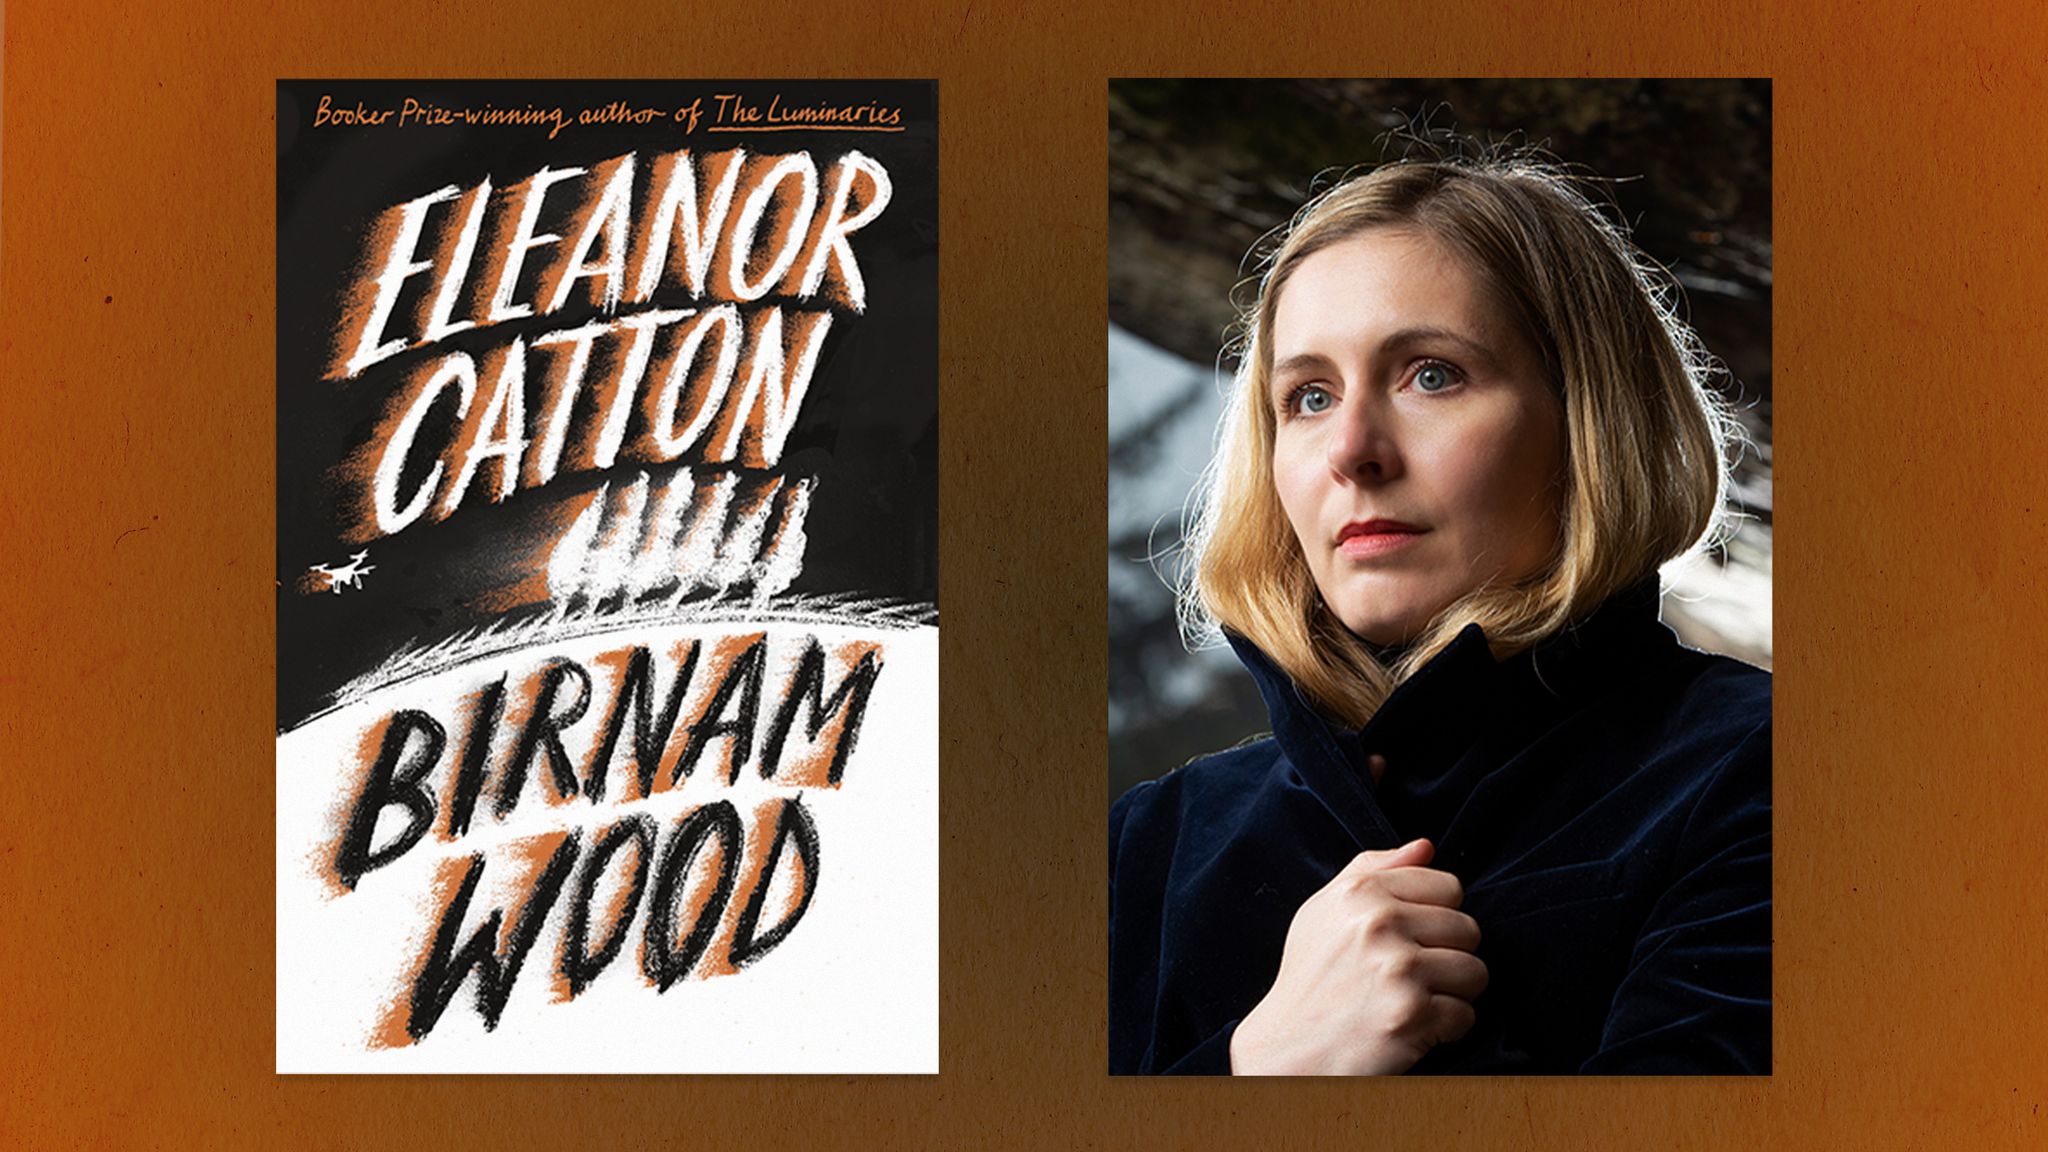 inspired by ‘macbeth,’ climate change, and the perils of social media, eleanor catton penned a deeply compelling novel